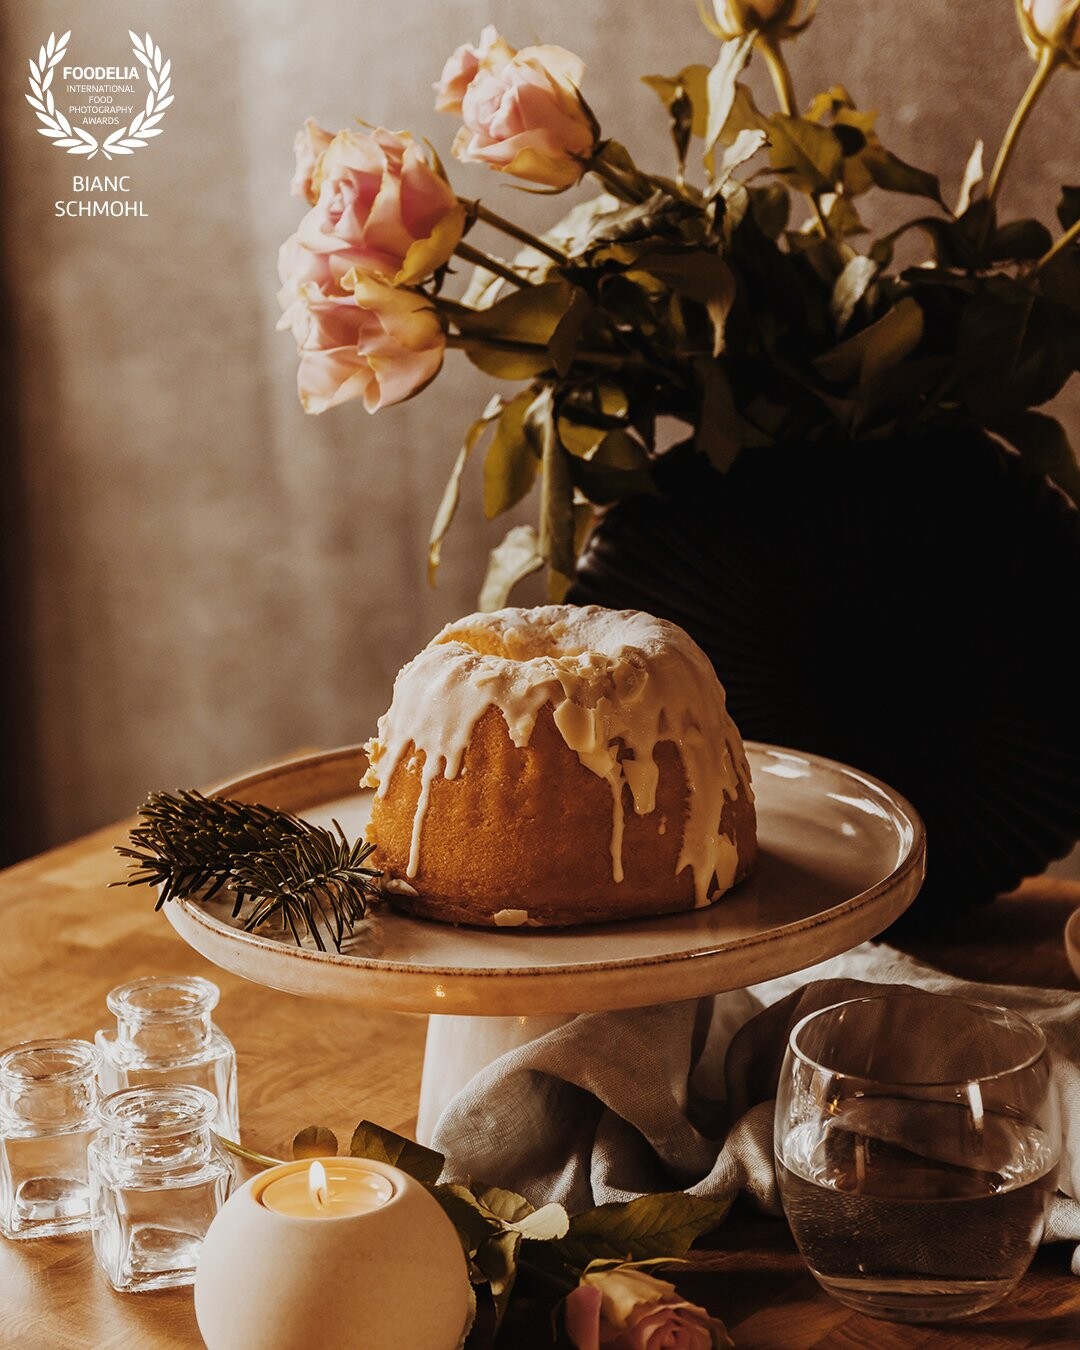 Winter and Christmas period always delivers pictures with such a festive and cosy atmosphere! This bundt cake was of course delicious, and the glaze is the extra 'icing on the cake', literally!